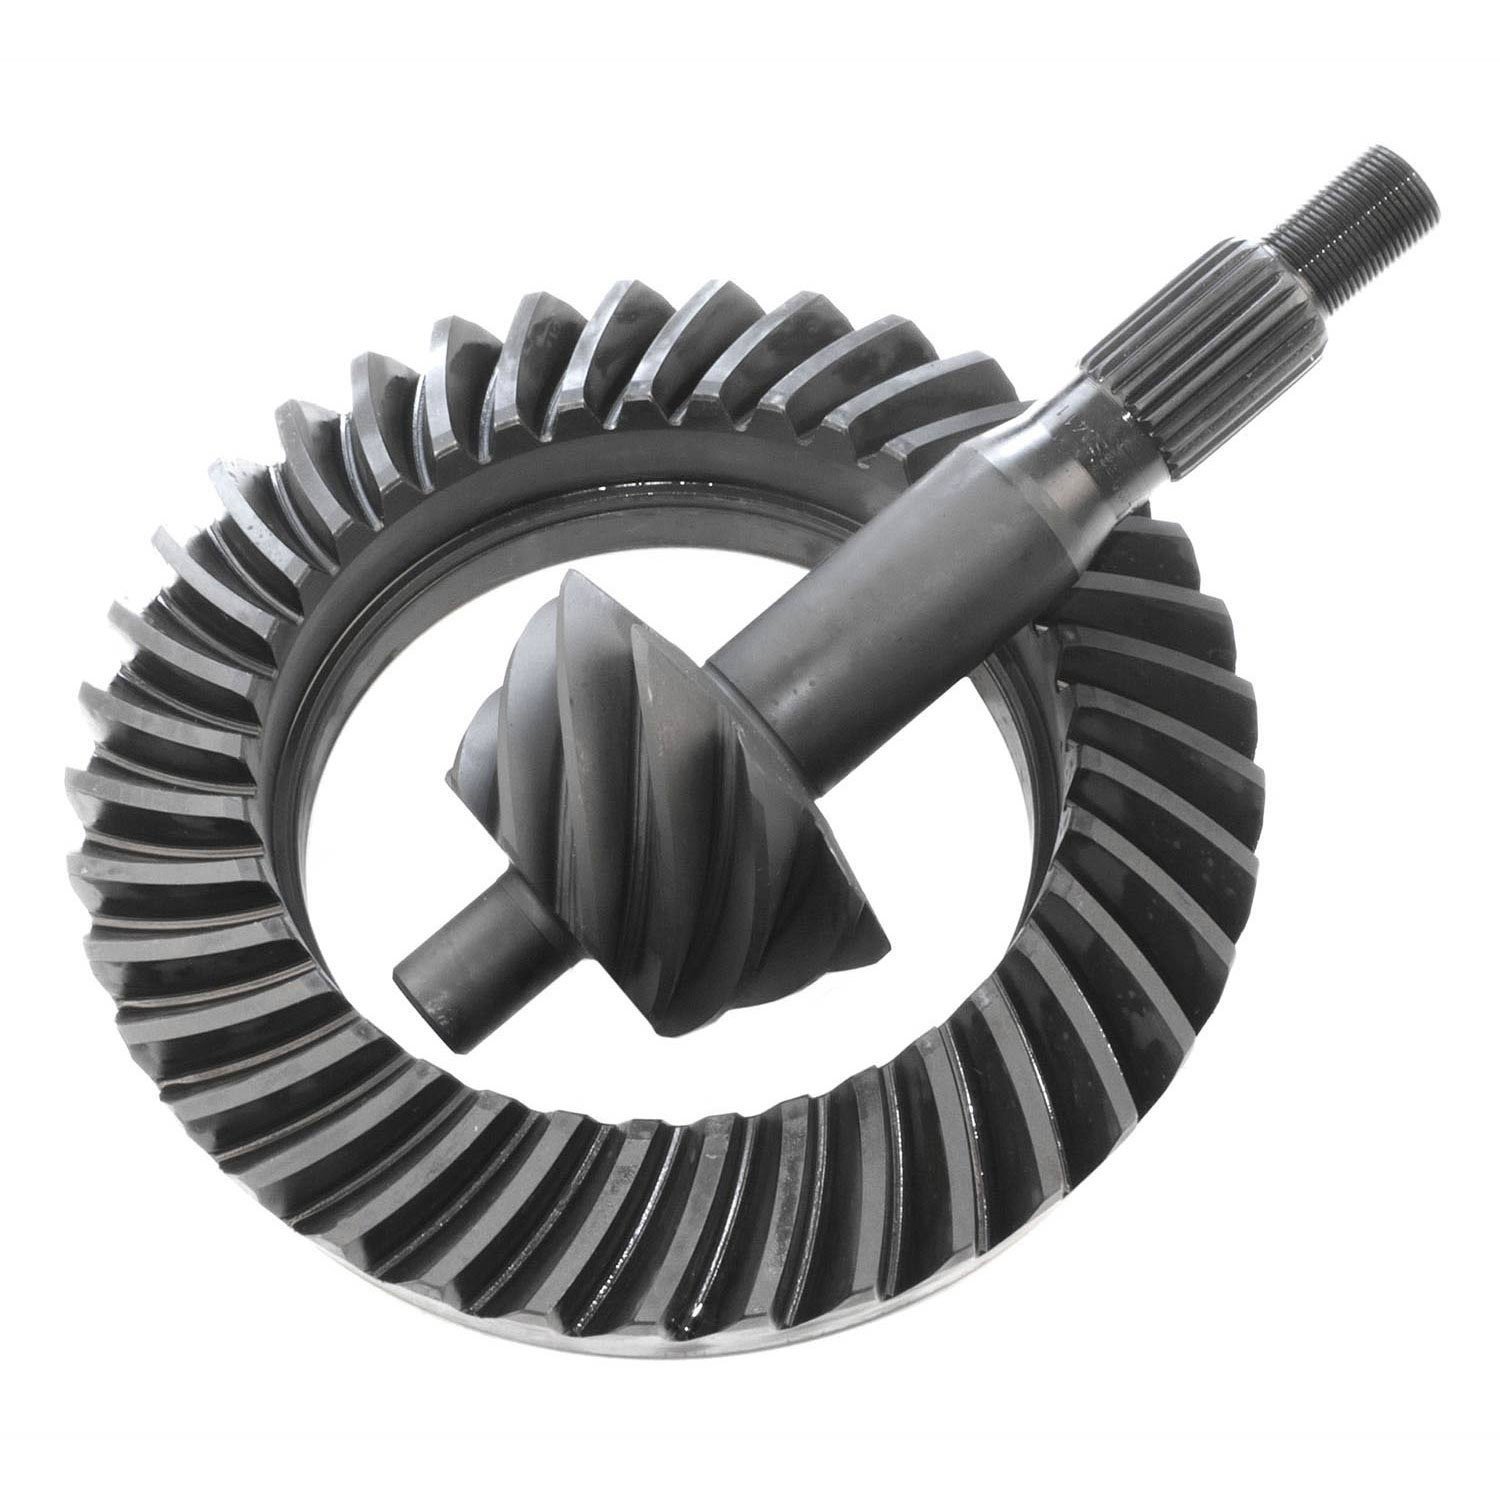 Ford ring pinion gear sets